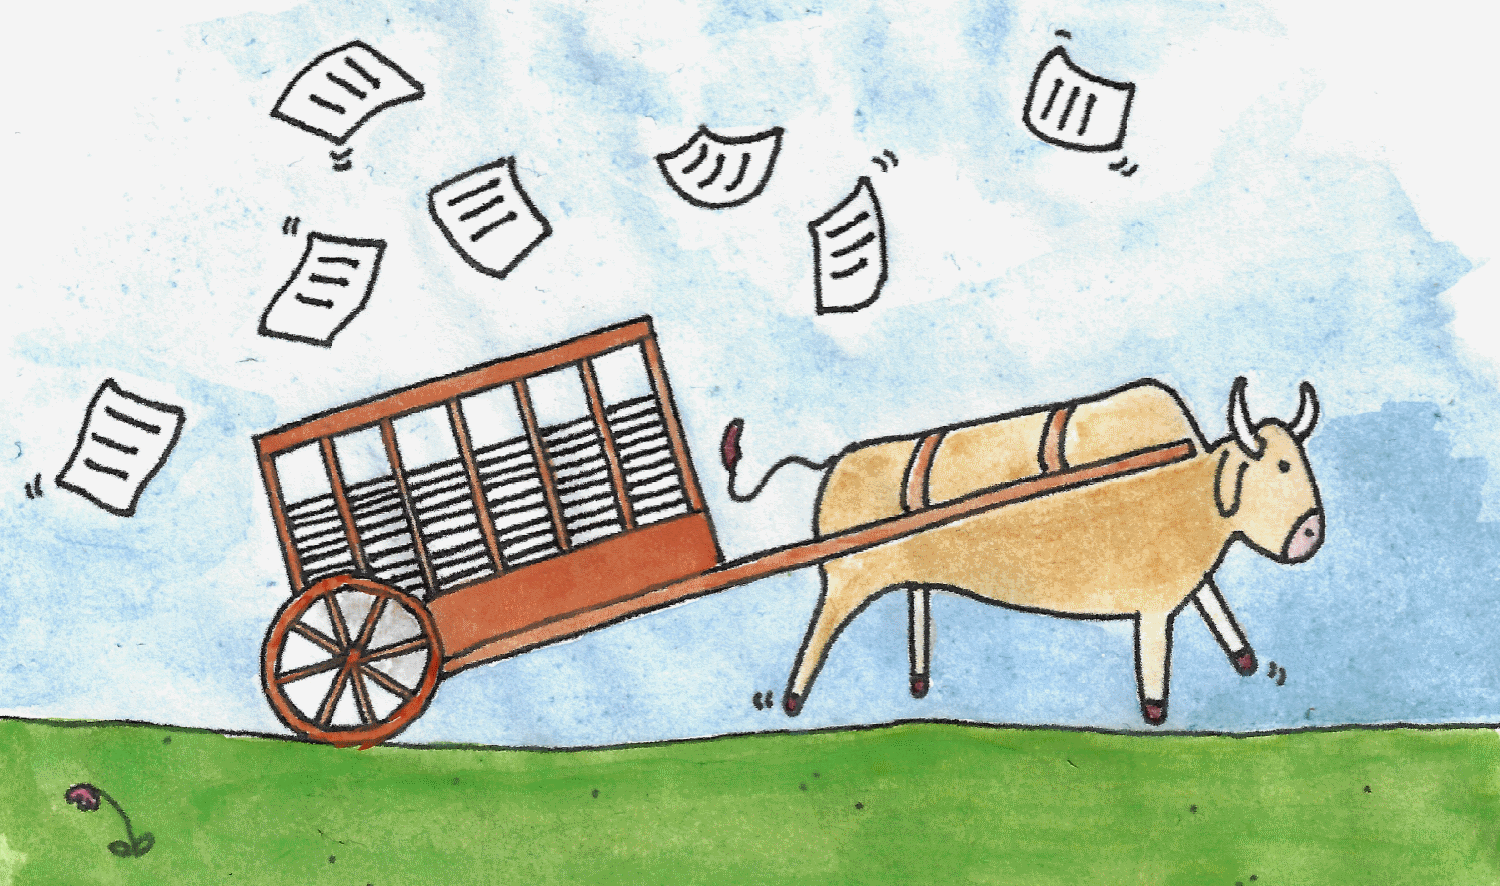 A watercolour painting of an ox cart full of documents, with documents up in the air.